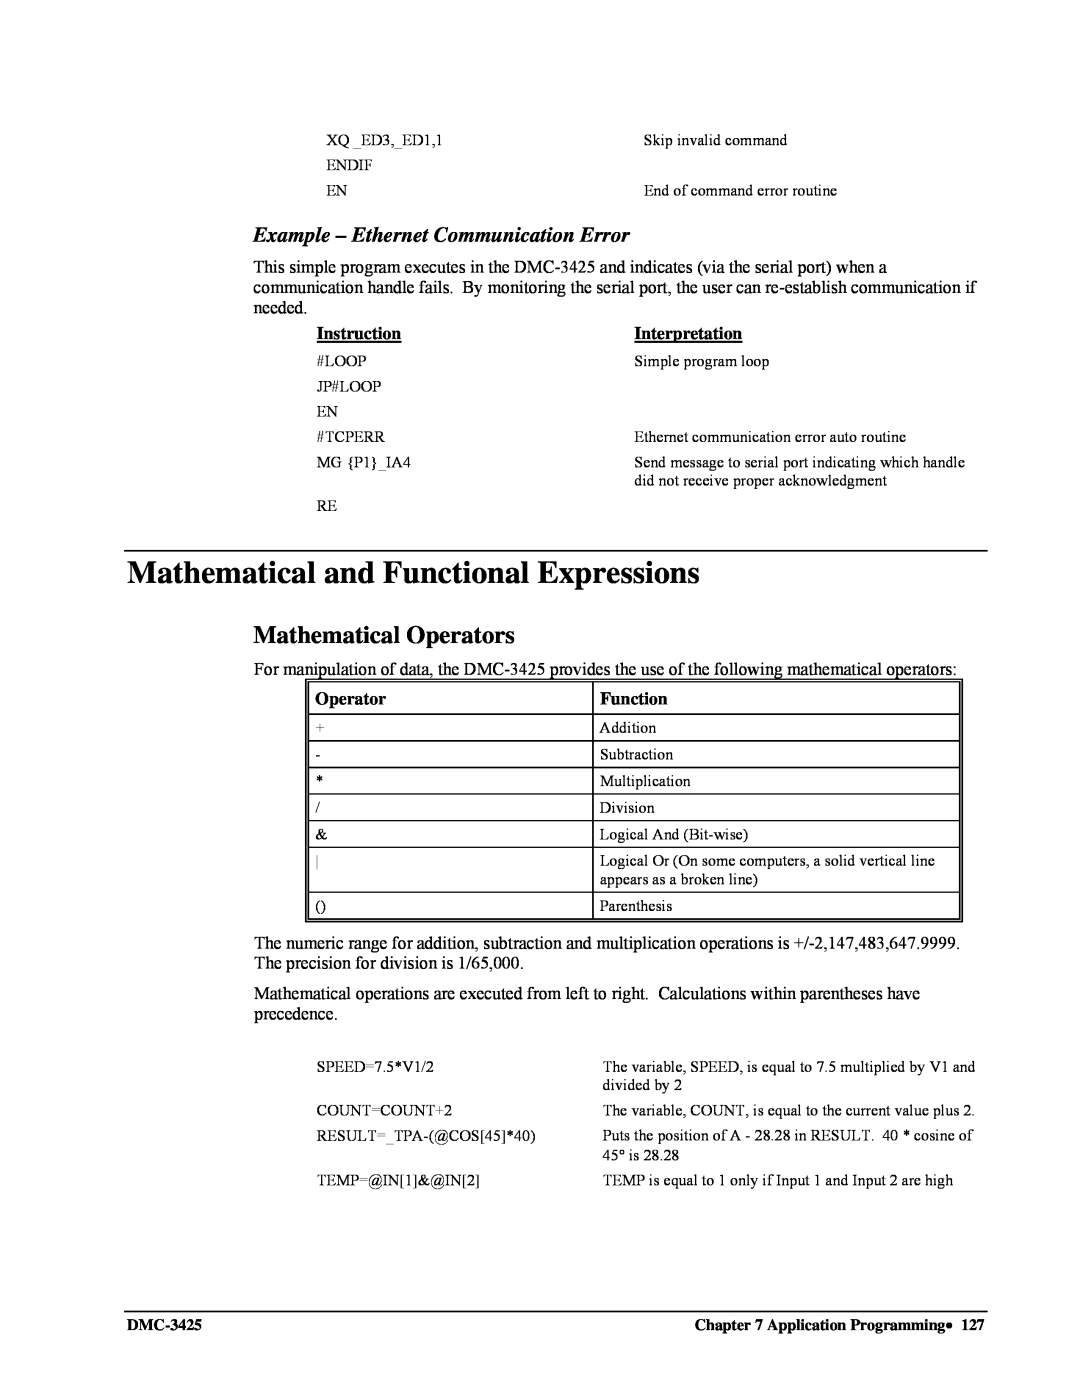 Galil DMC-3425 Mathematical and Functional Expressions, Mathematical Operators, Example – Ethernet Communication Error 